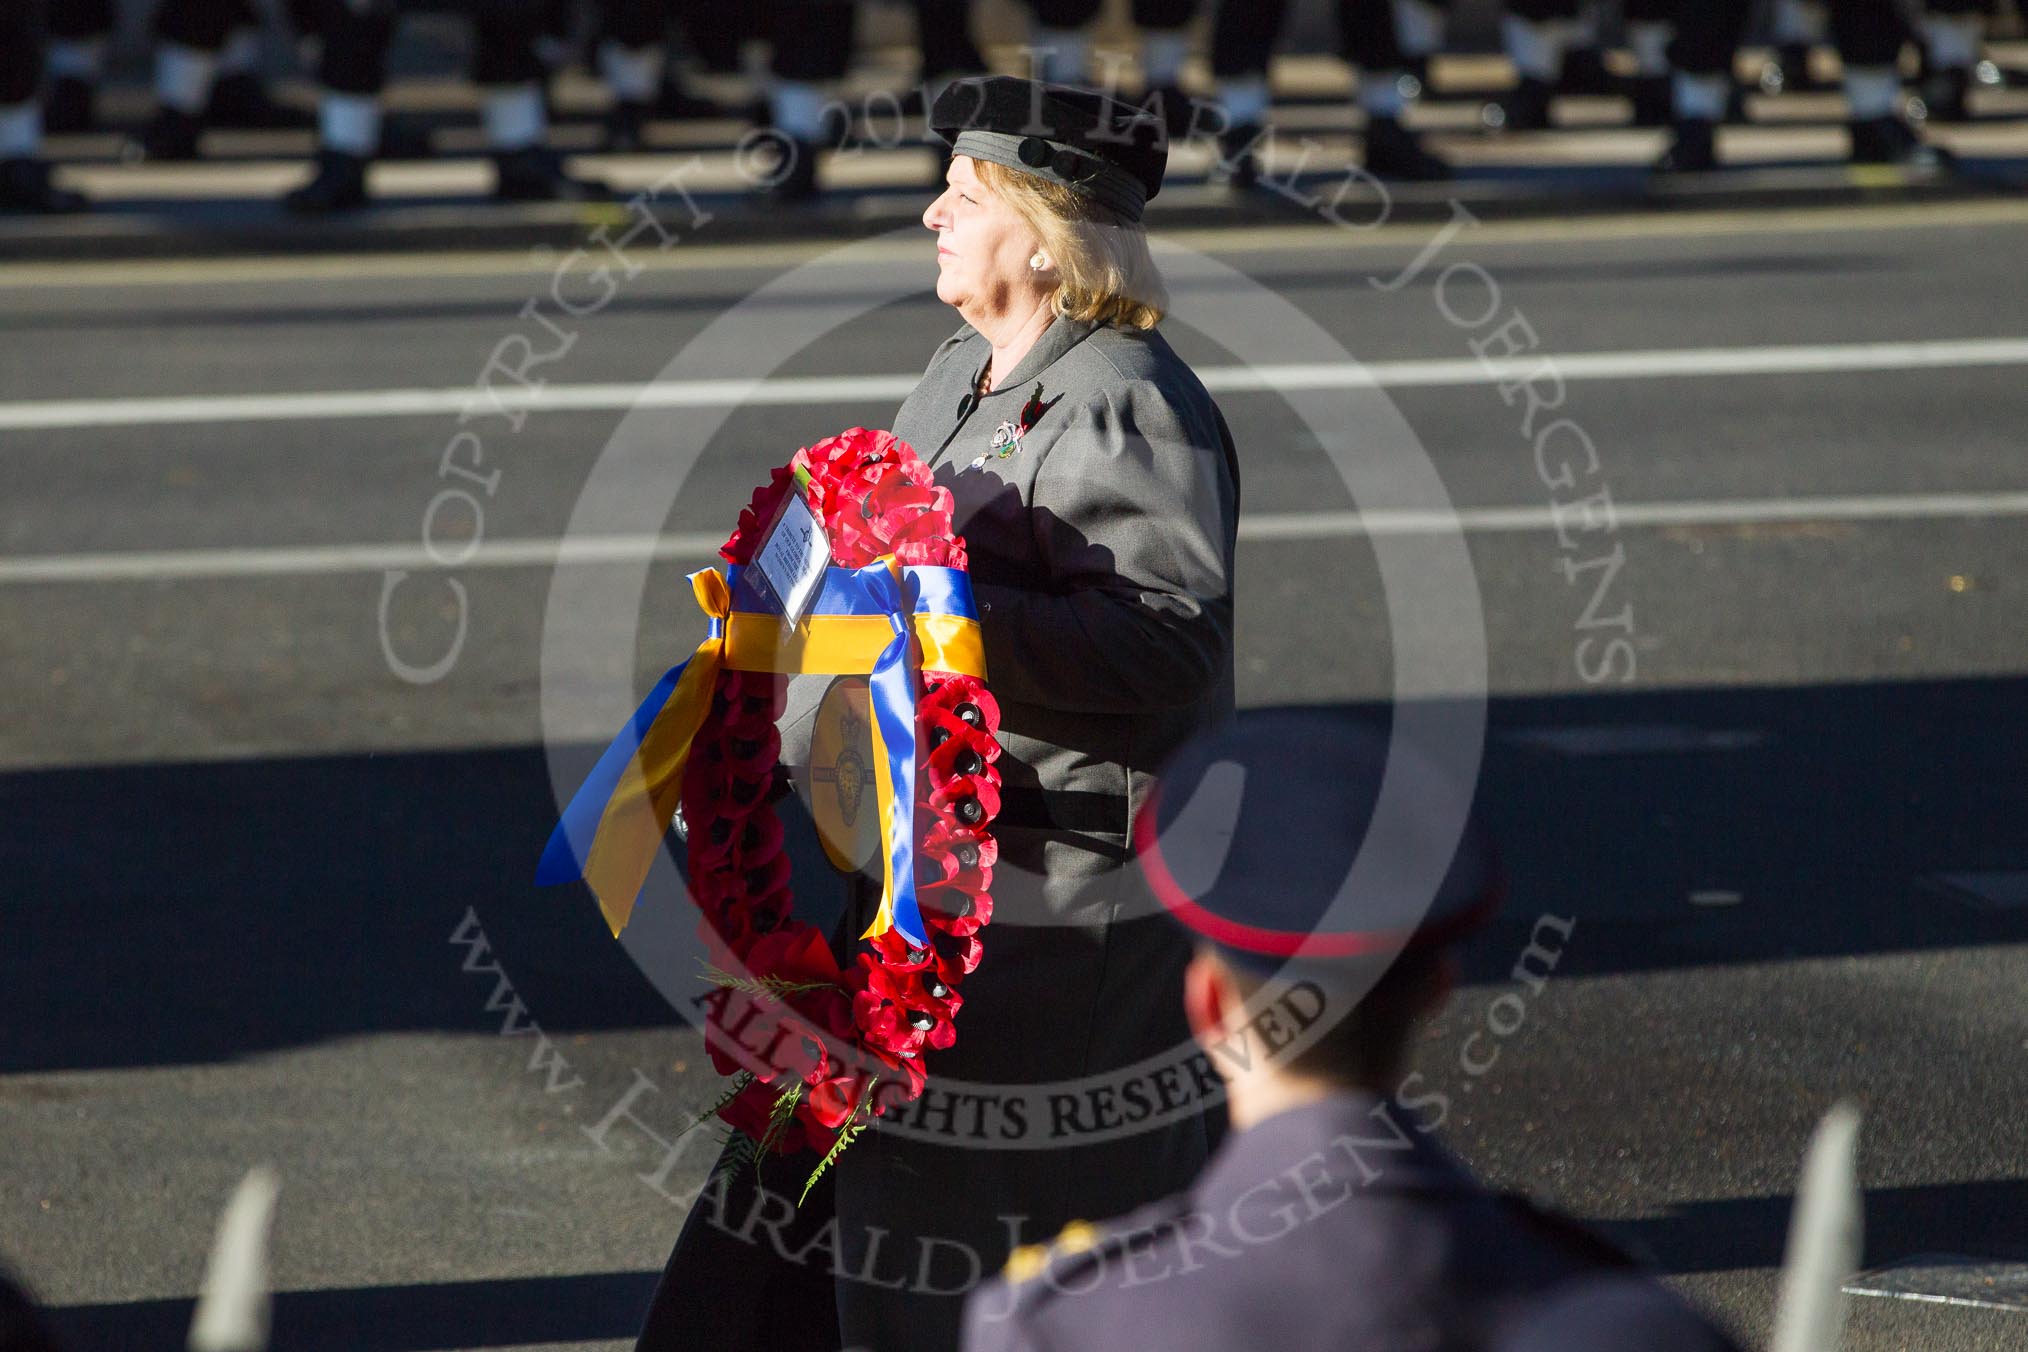 Remembrance Sunday 2012 Cenotaph March Past: Wendy Bromwich for the Women Section of the Royal British Legion..
Whitehall, Cenotaph,
London SW1,

United Kingdom,
on 11 November 2012 at 11:28, image #16